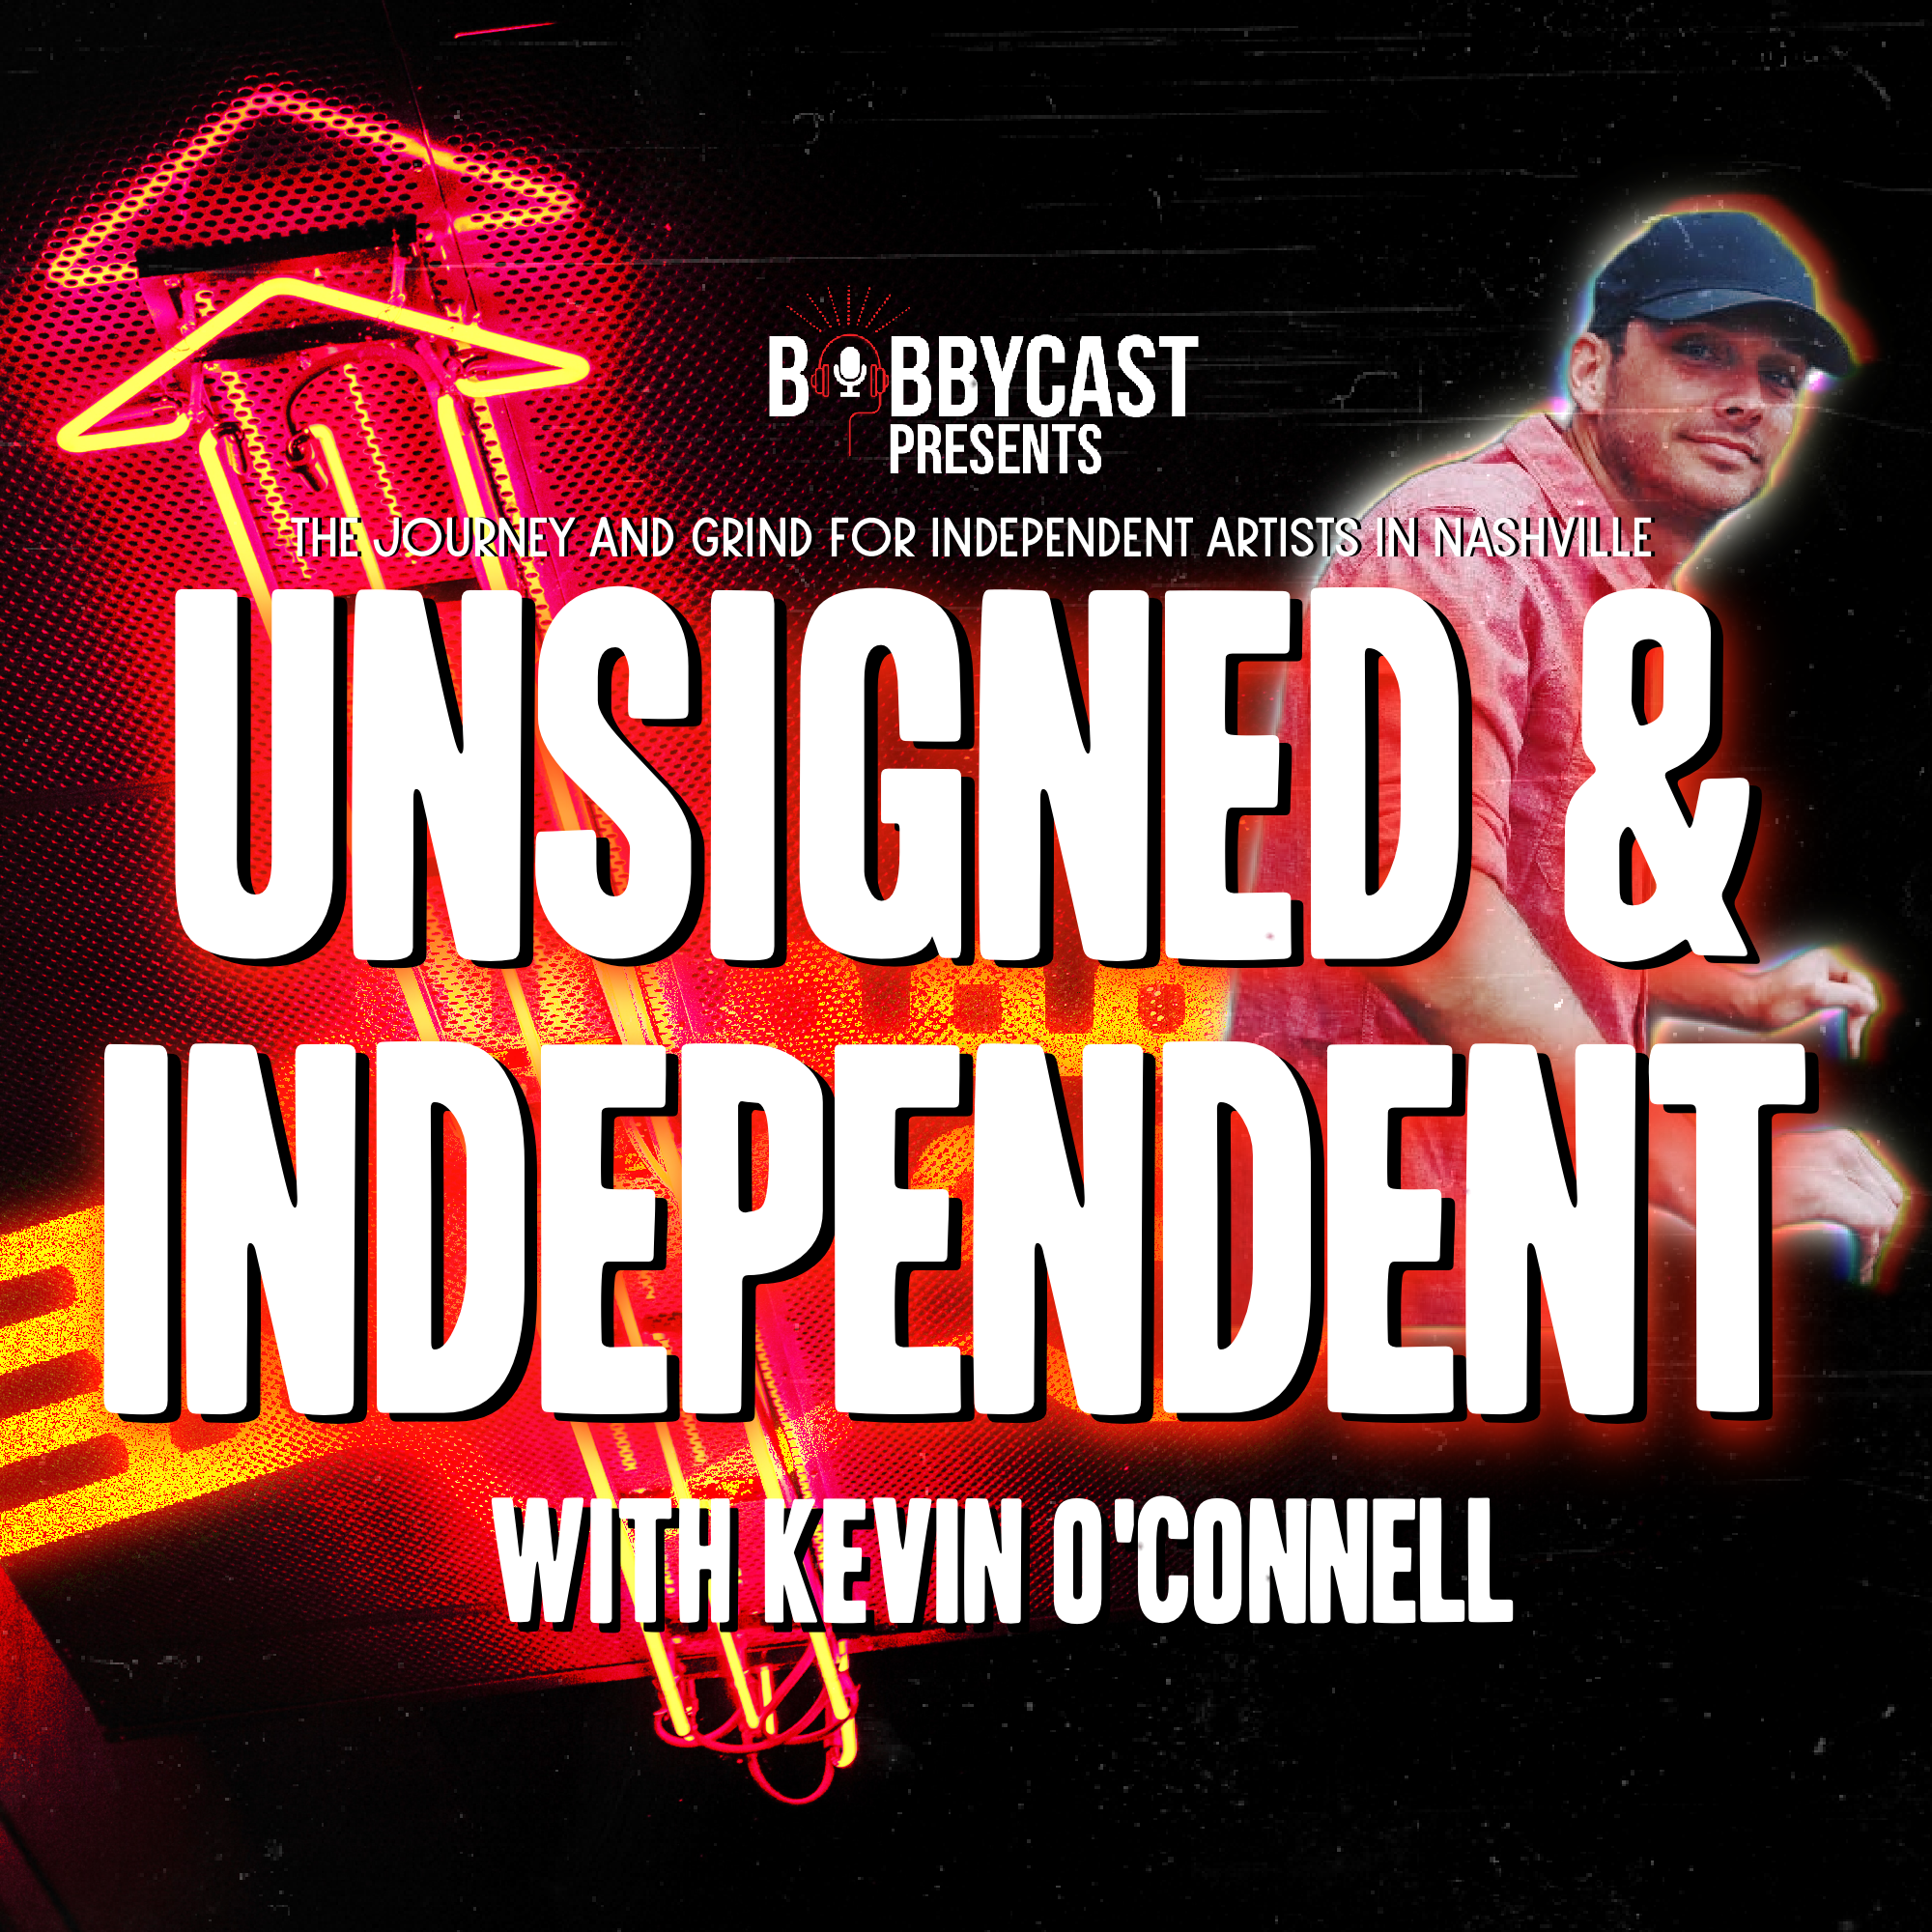 BobbyCast Presents: Unsigned & Independent:  Tuten Brothers - From Finance to Publishing Deals